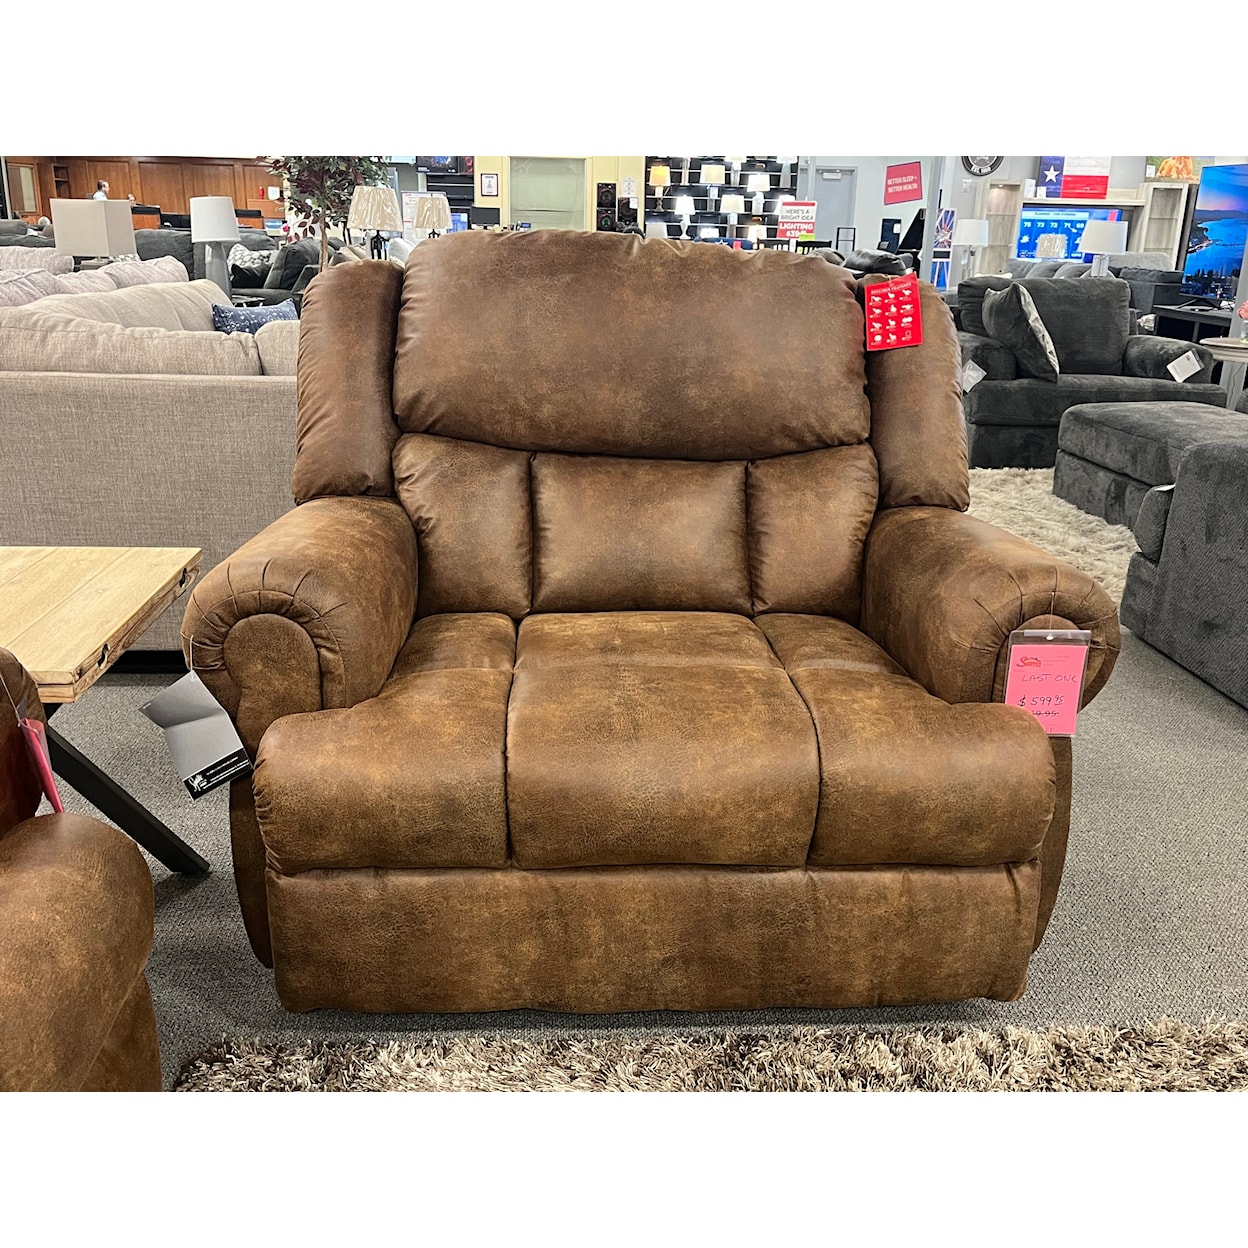 Sam's Furniture Clearance As Is Recliner